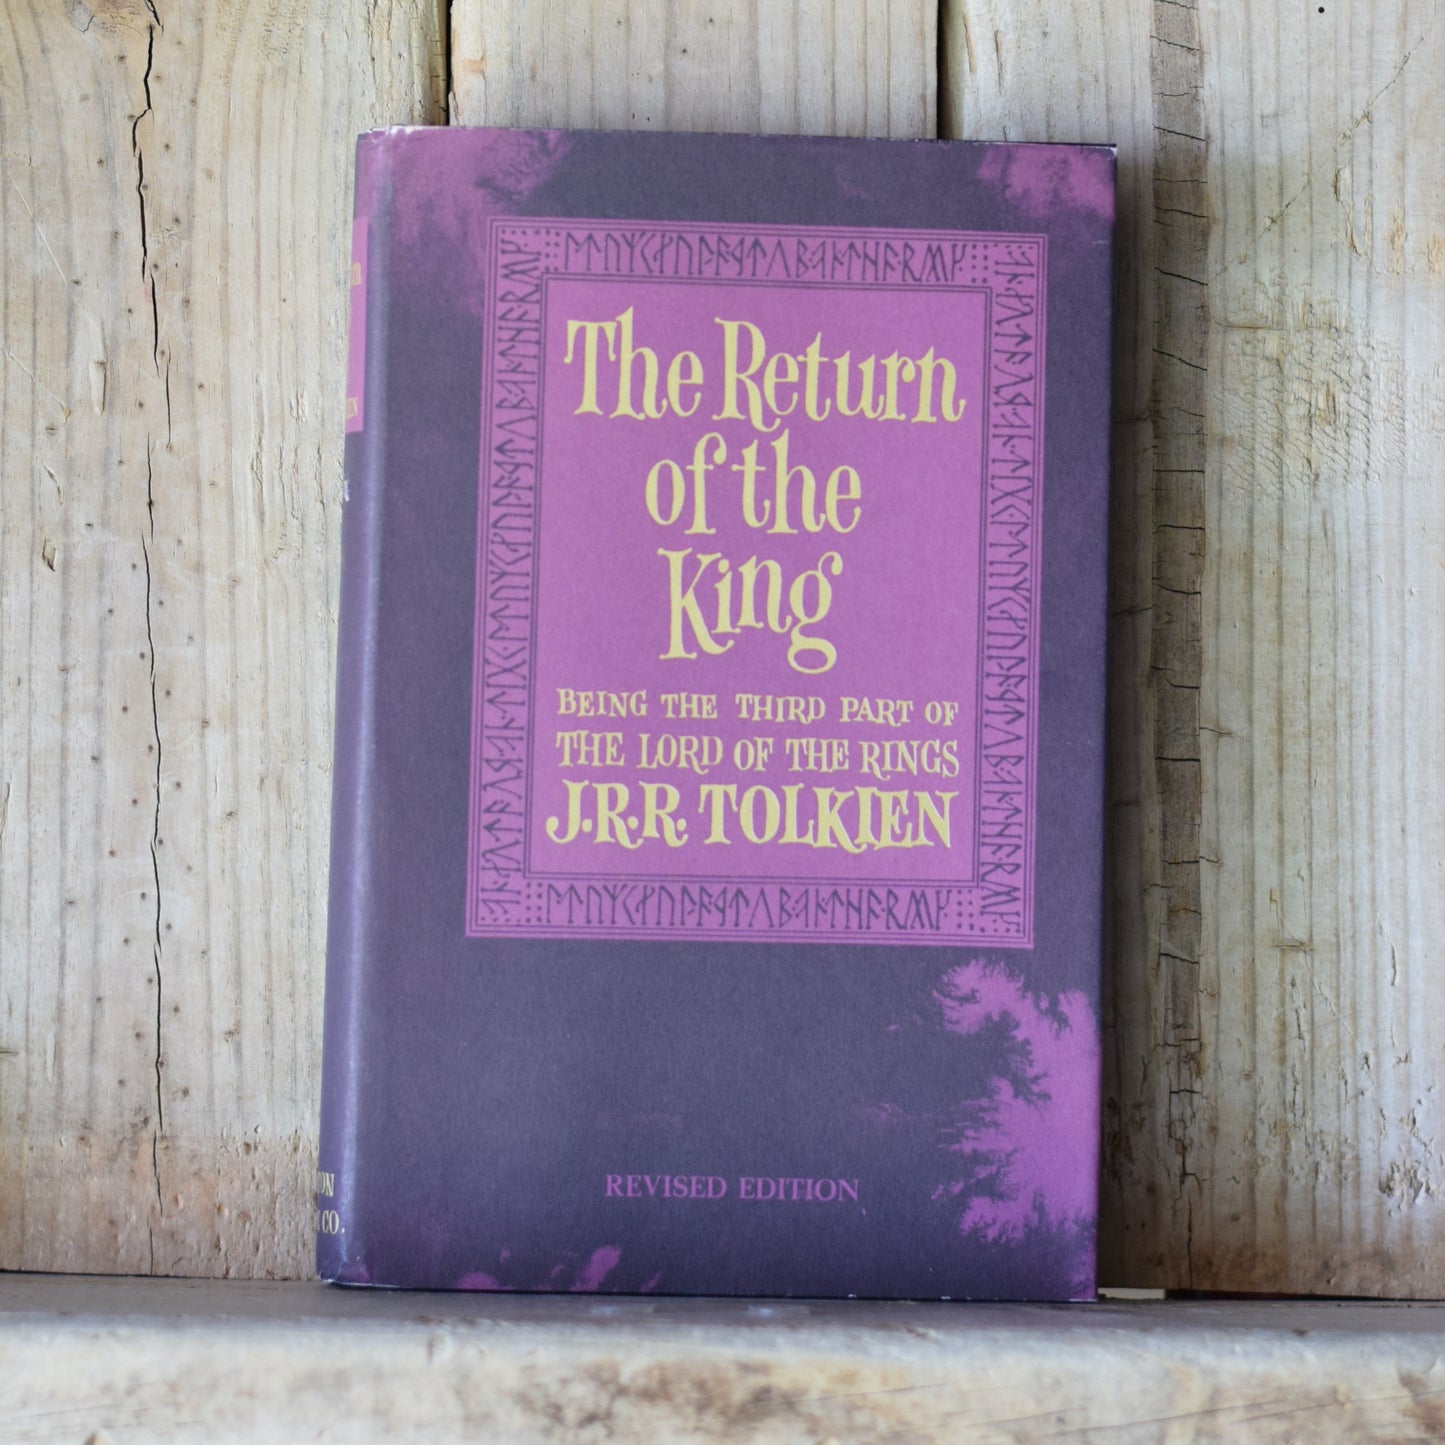 Vintage Fantasy Hardback Box Set: JRR Tolkien - The Lord of the Rings, Second Edition, Revised ELEVENTH/TWELFTH PRINTING